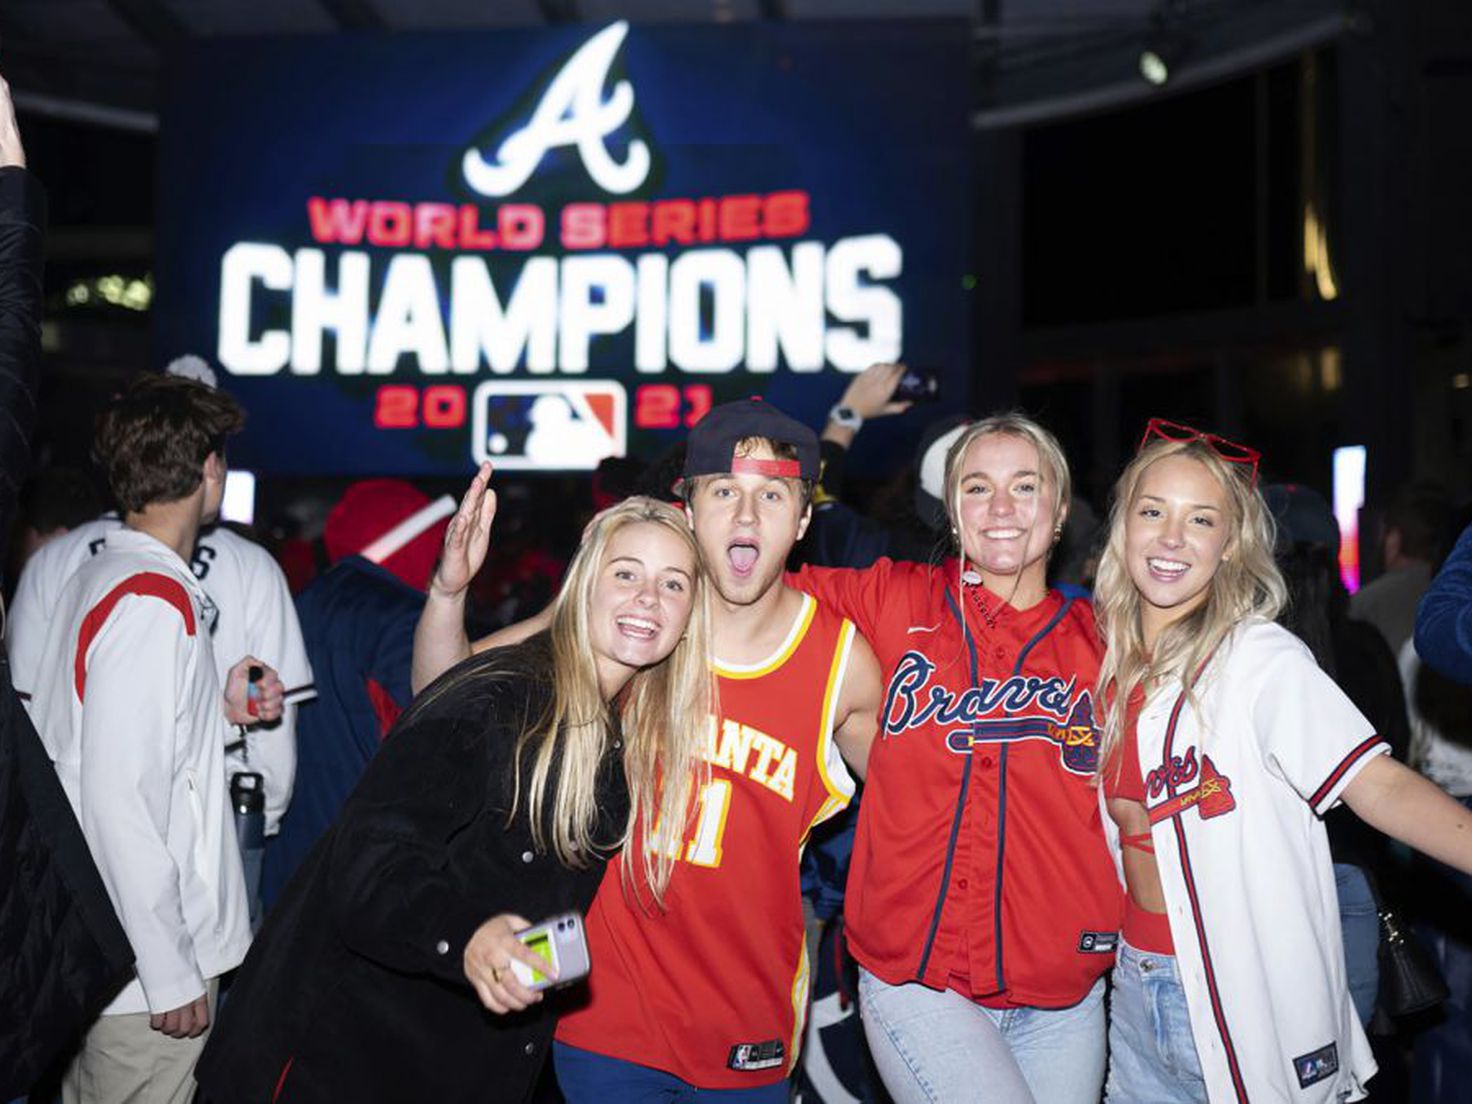 Braves Win! 2021 World Series Champions - Early County News